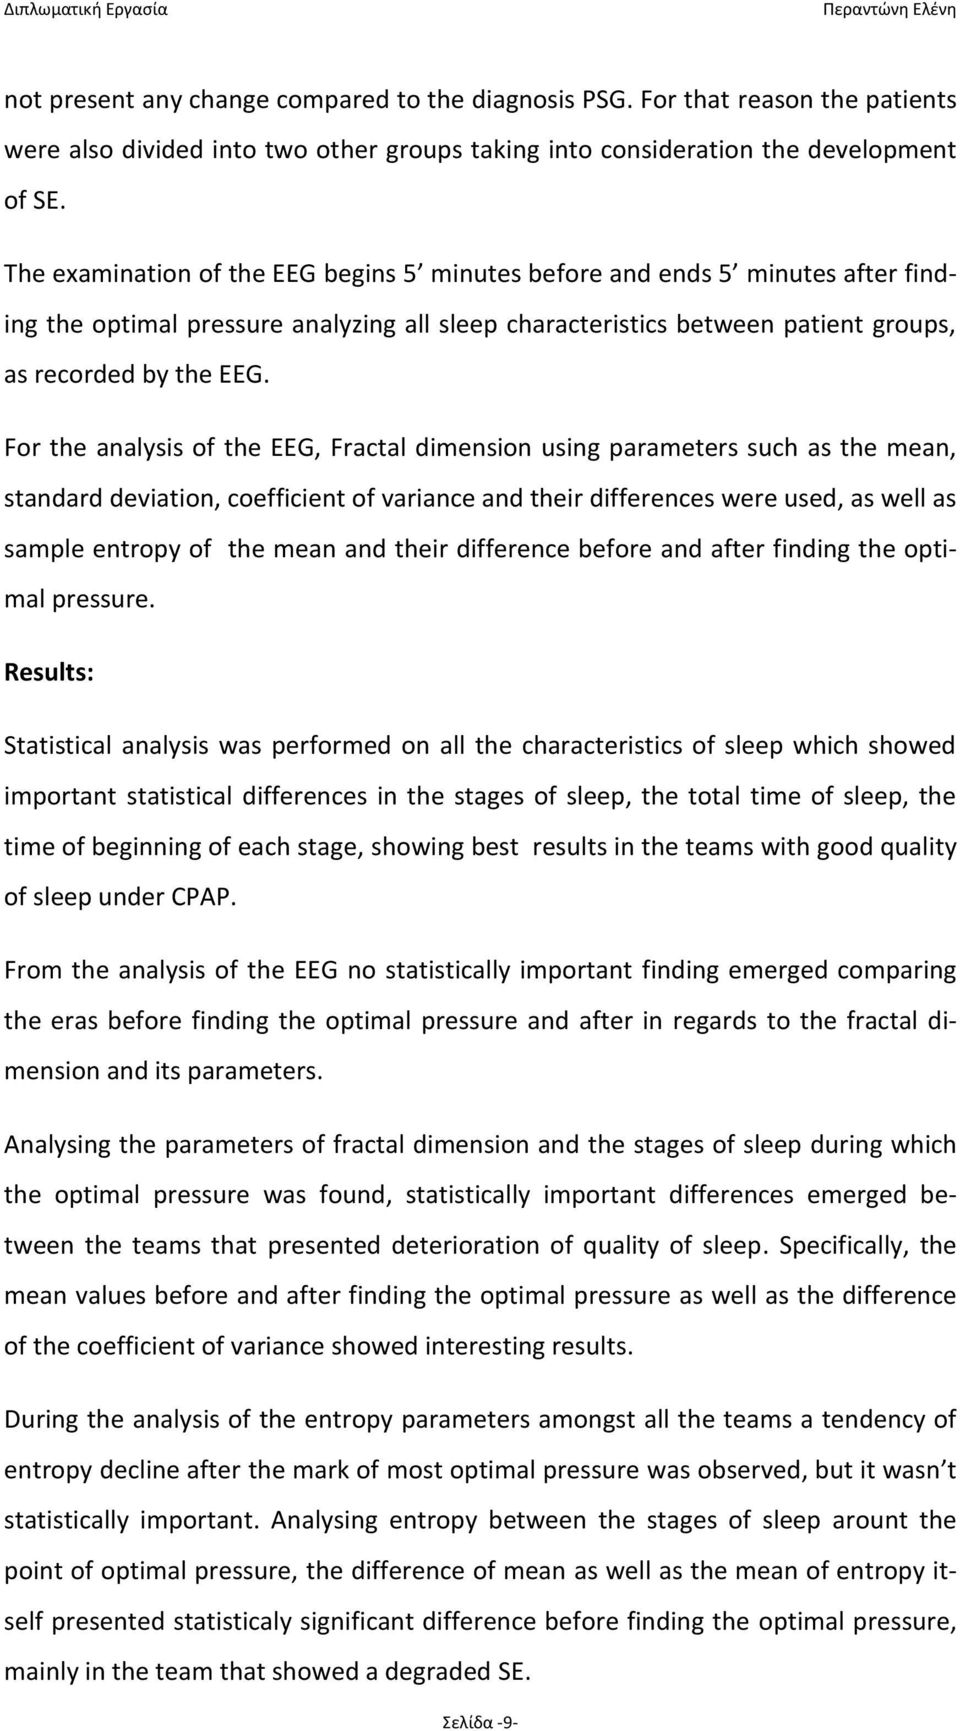 For the analysis of the EEG, Fractal dimension using parameters such as the mean, standard deviation, coefficient of variance and their differences were used, as well as sample entropy of the mean